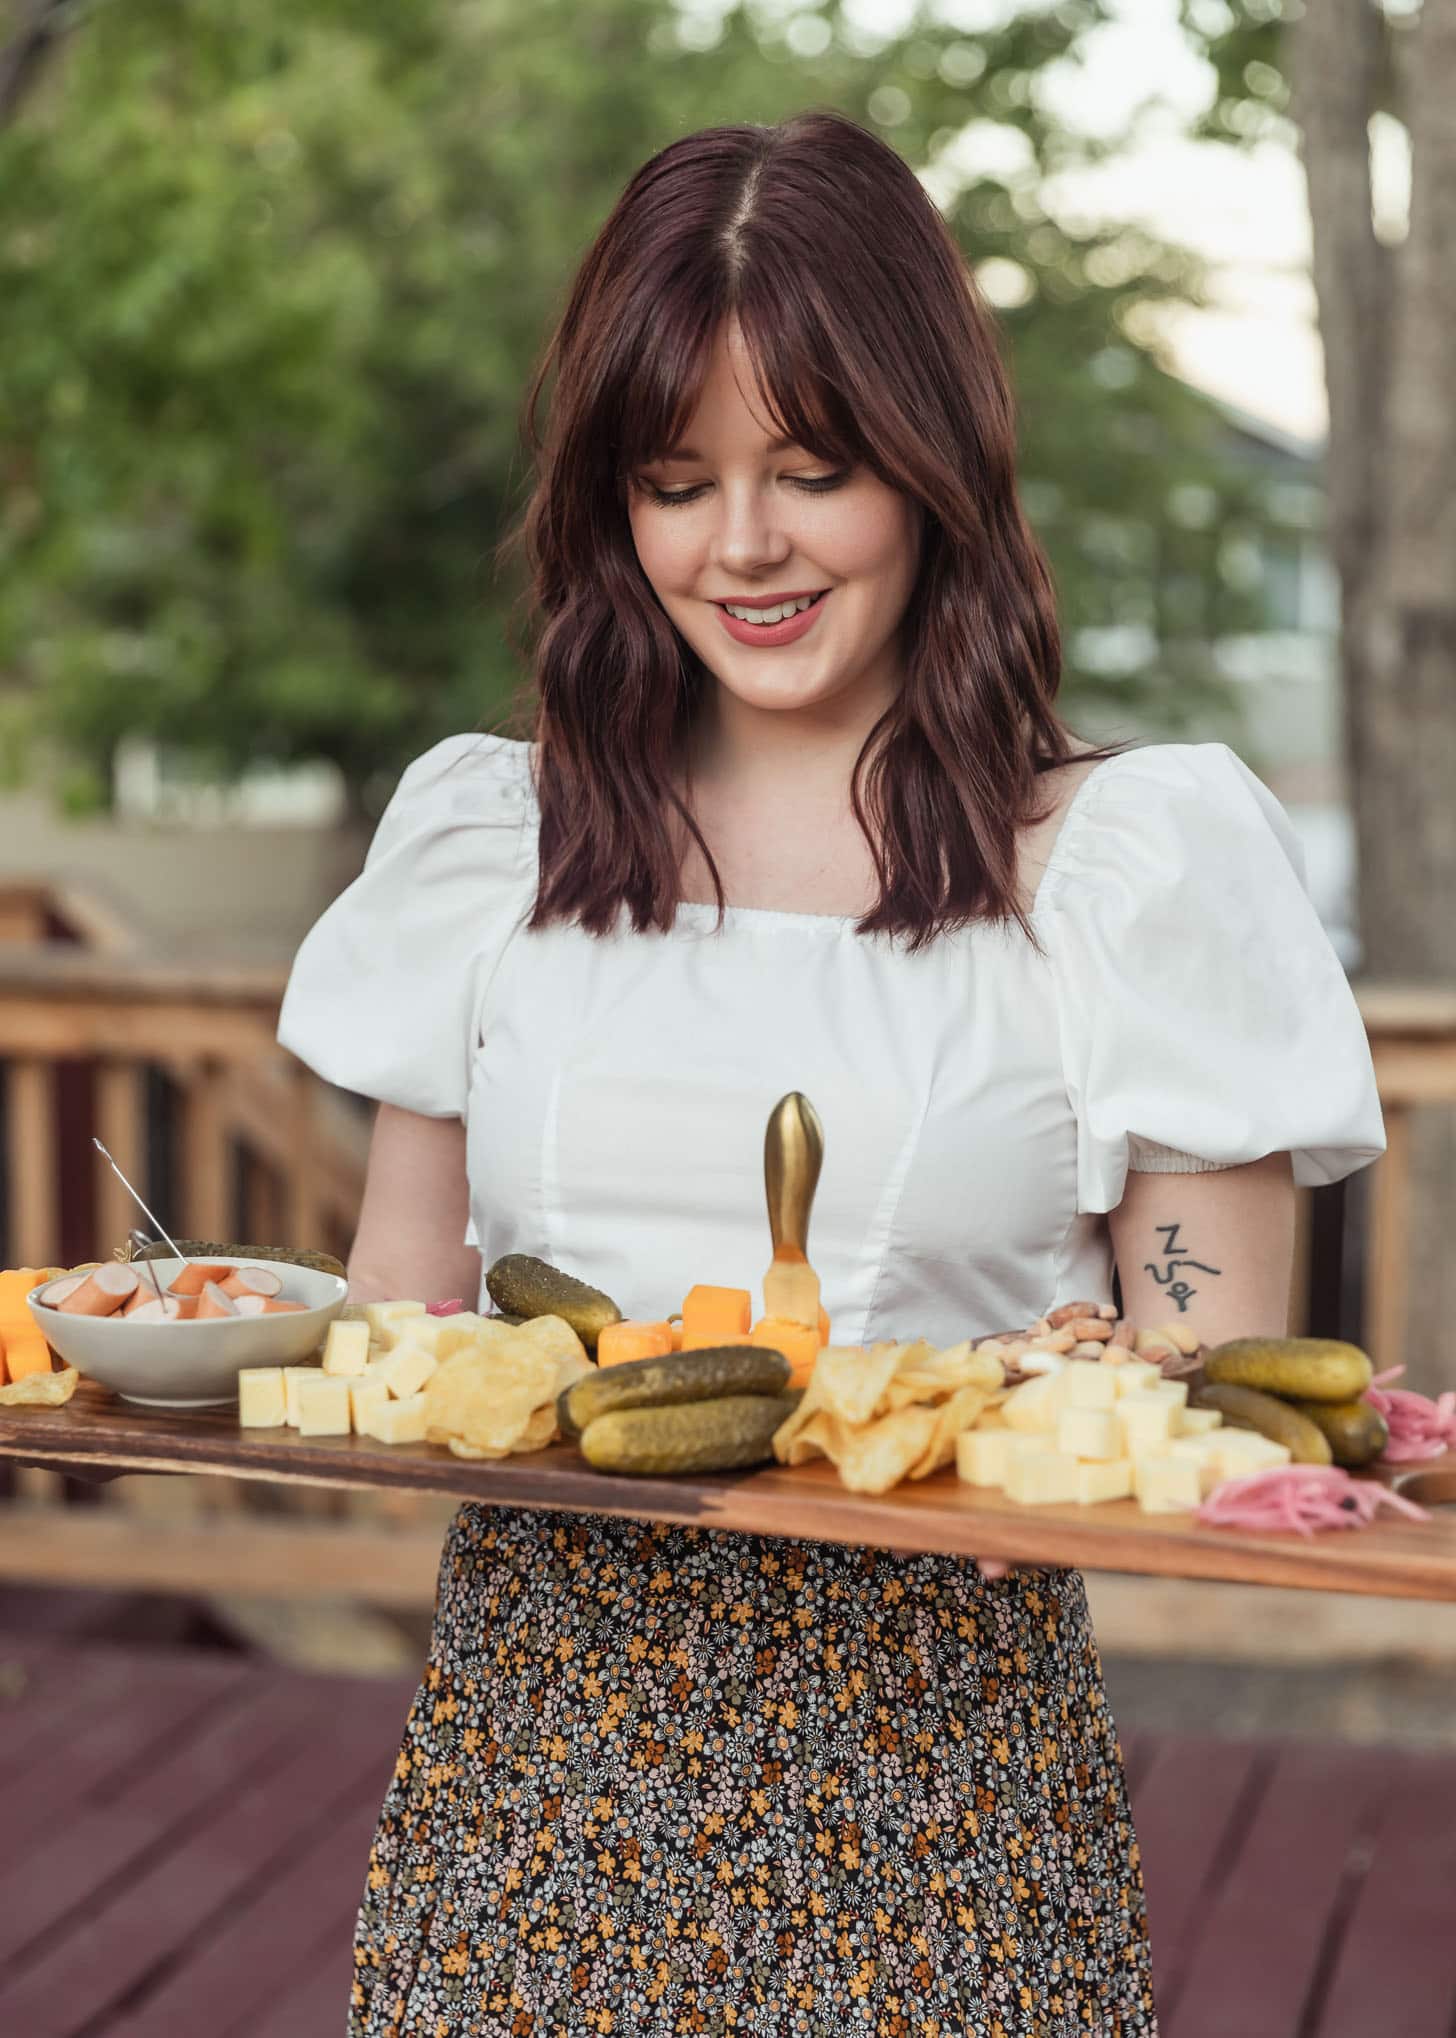 A woman with dark wavy hair and bangs wearing a white puffy shirt and black floral skirt, holding a charcuterie board, and standing in a backyard.